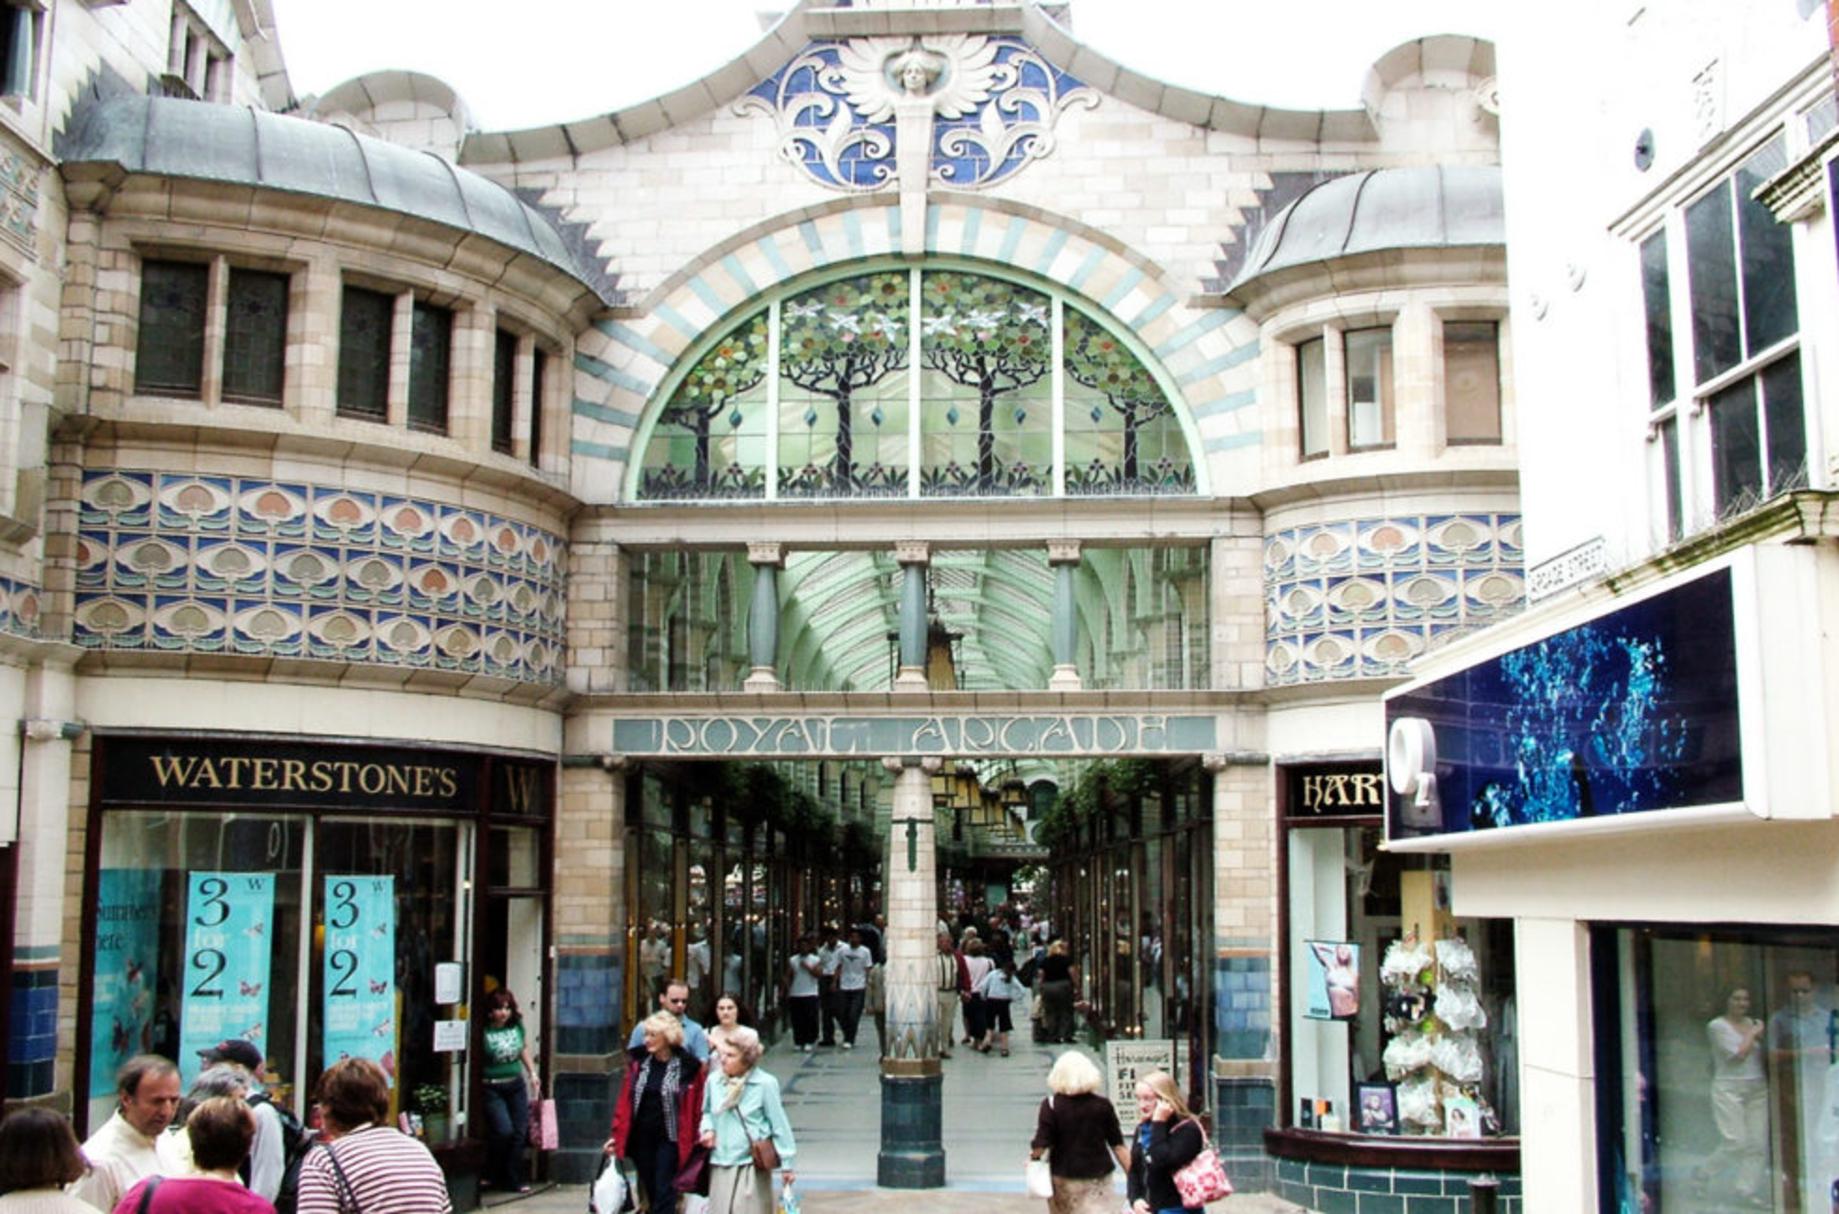 Norwich’s Royal Arcade up for sale for £1.25m